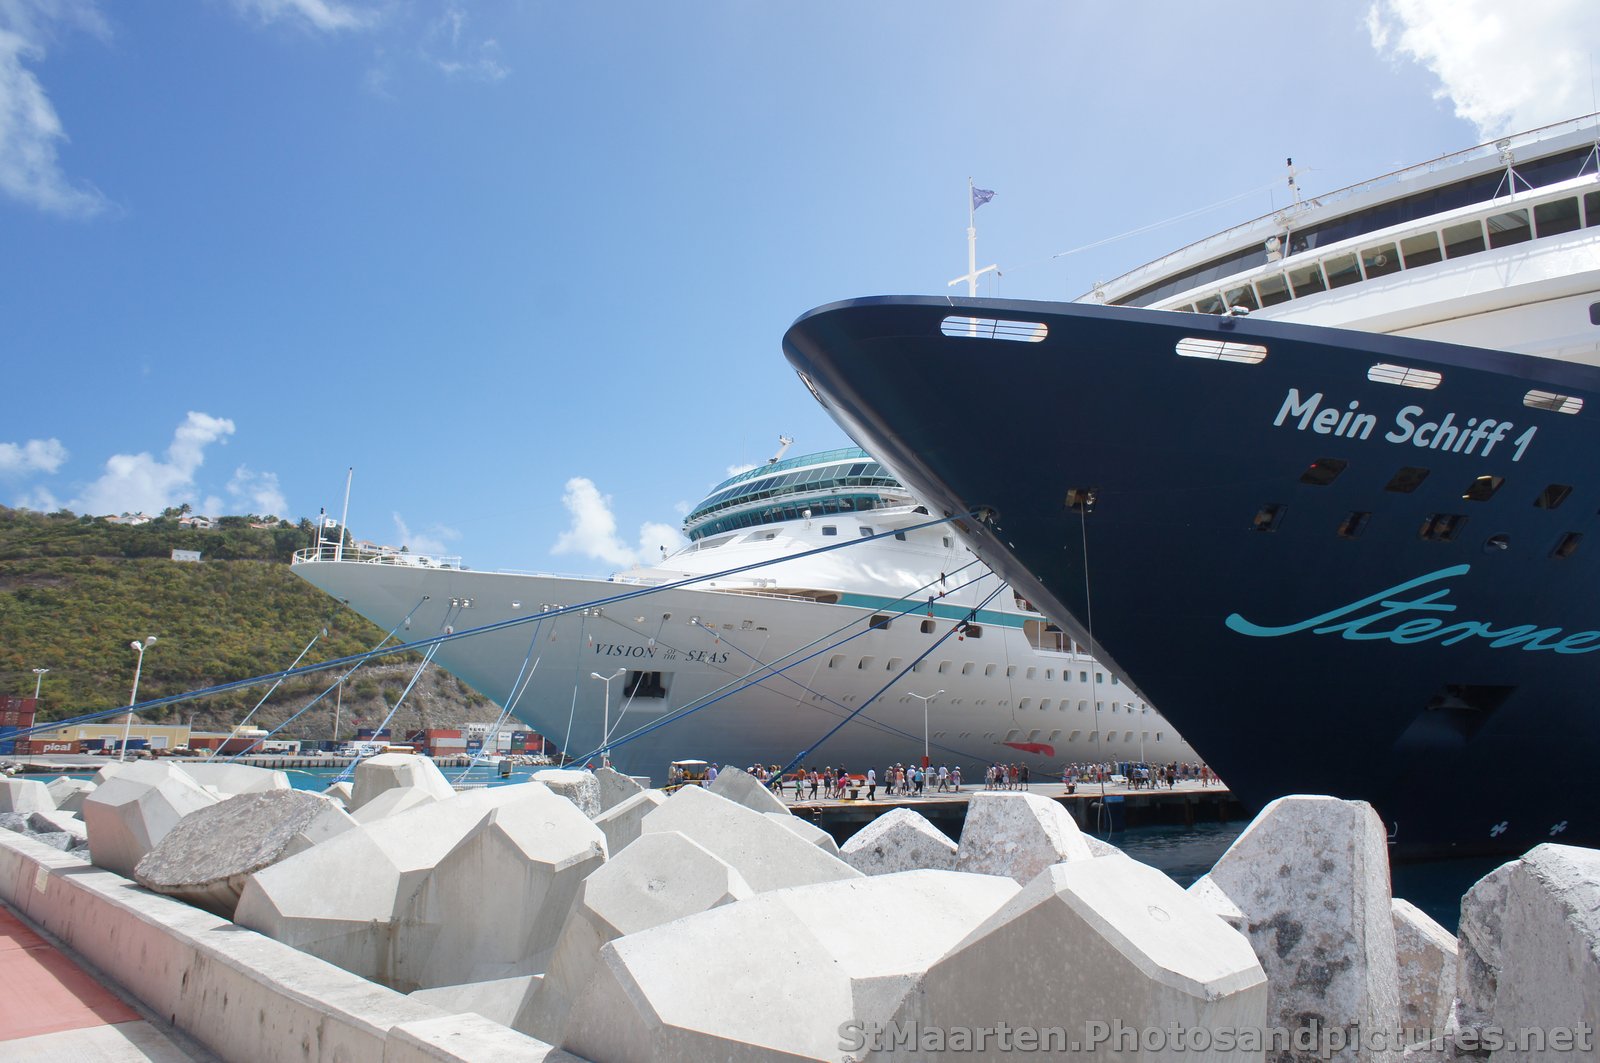 Royal Caribbean Vision of the Seas and Mein Schiff 1 Cruise Ship docked at St Maarten.jpg
